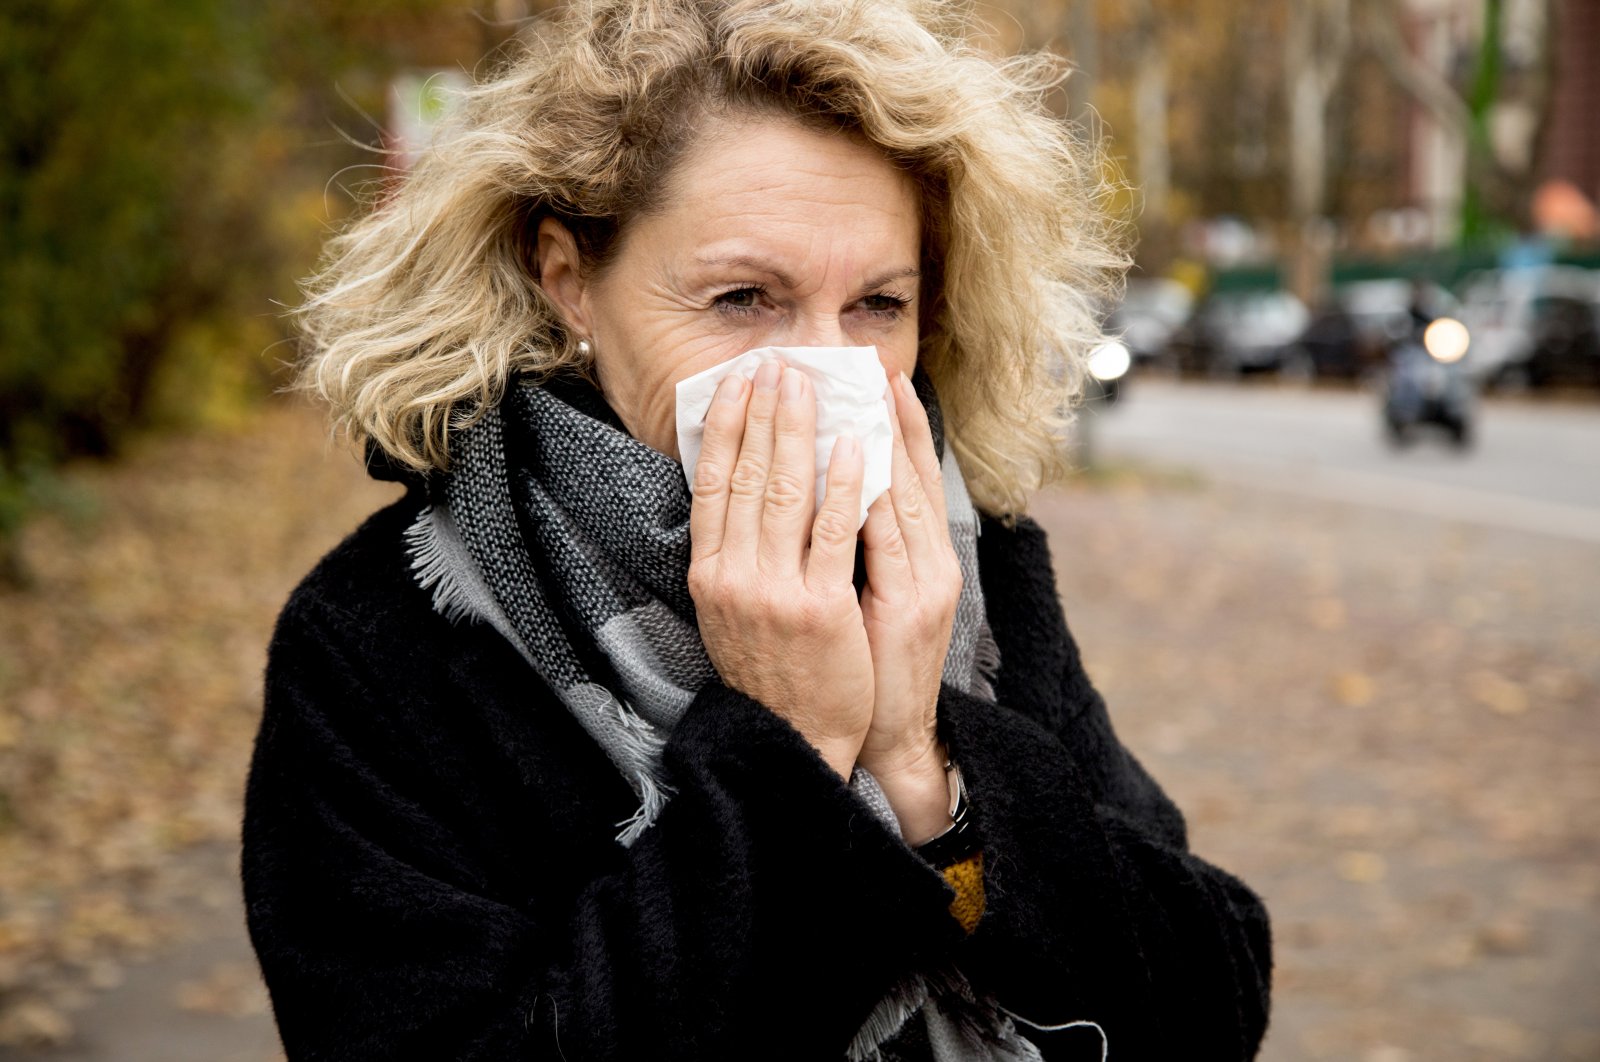 When someone sneezes or coughs, that spreads pathogens via saliva and nasal secretions, says Germany’s Federal Centre for Health Education (BZgA), Nov. 13, 2018. (dpa Photo)